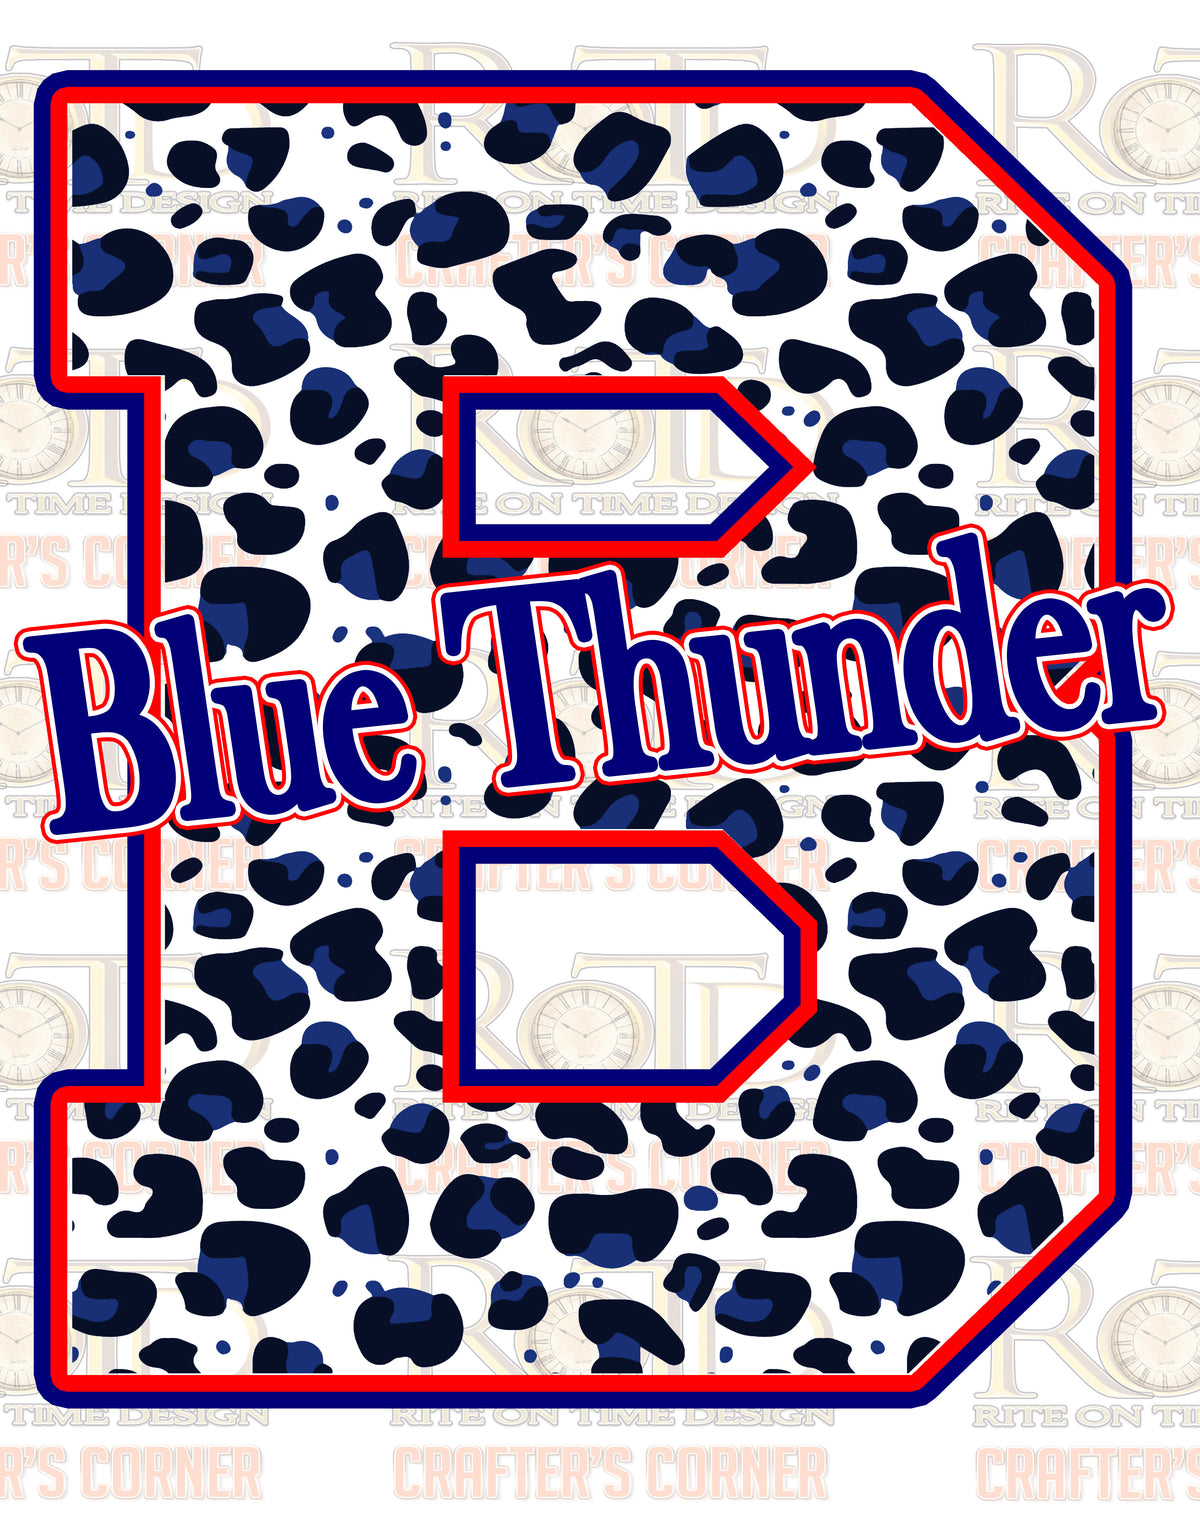 DTF Screen Print Image - B is for Blue Thunder